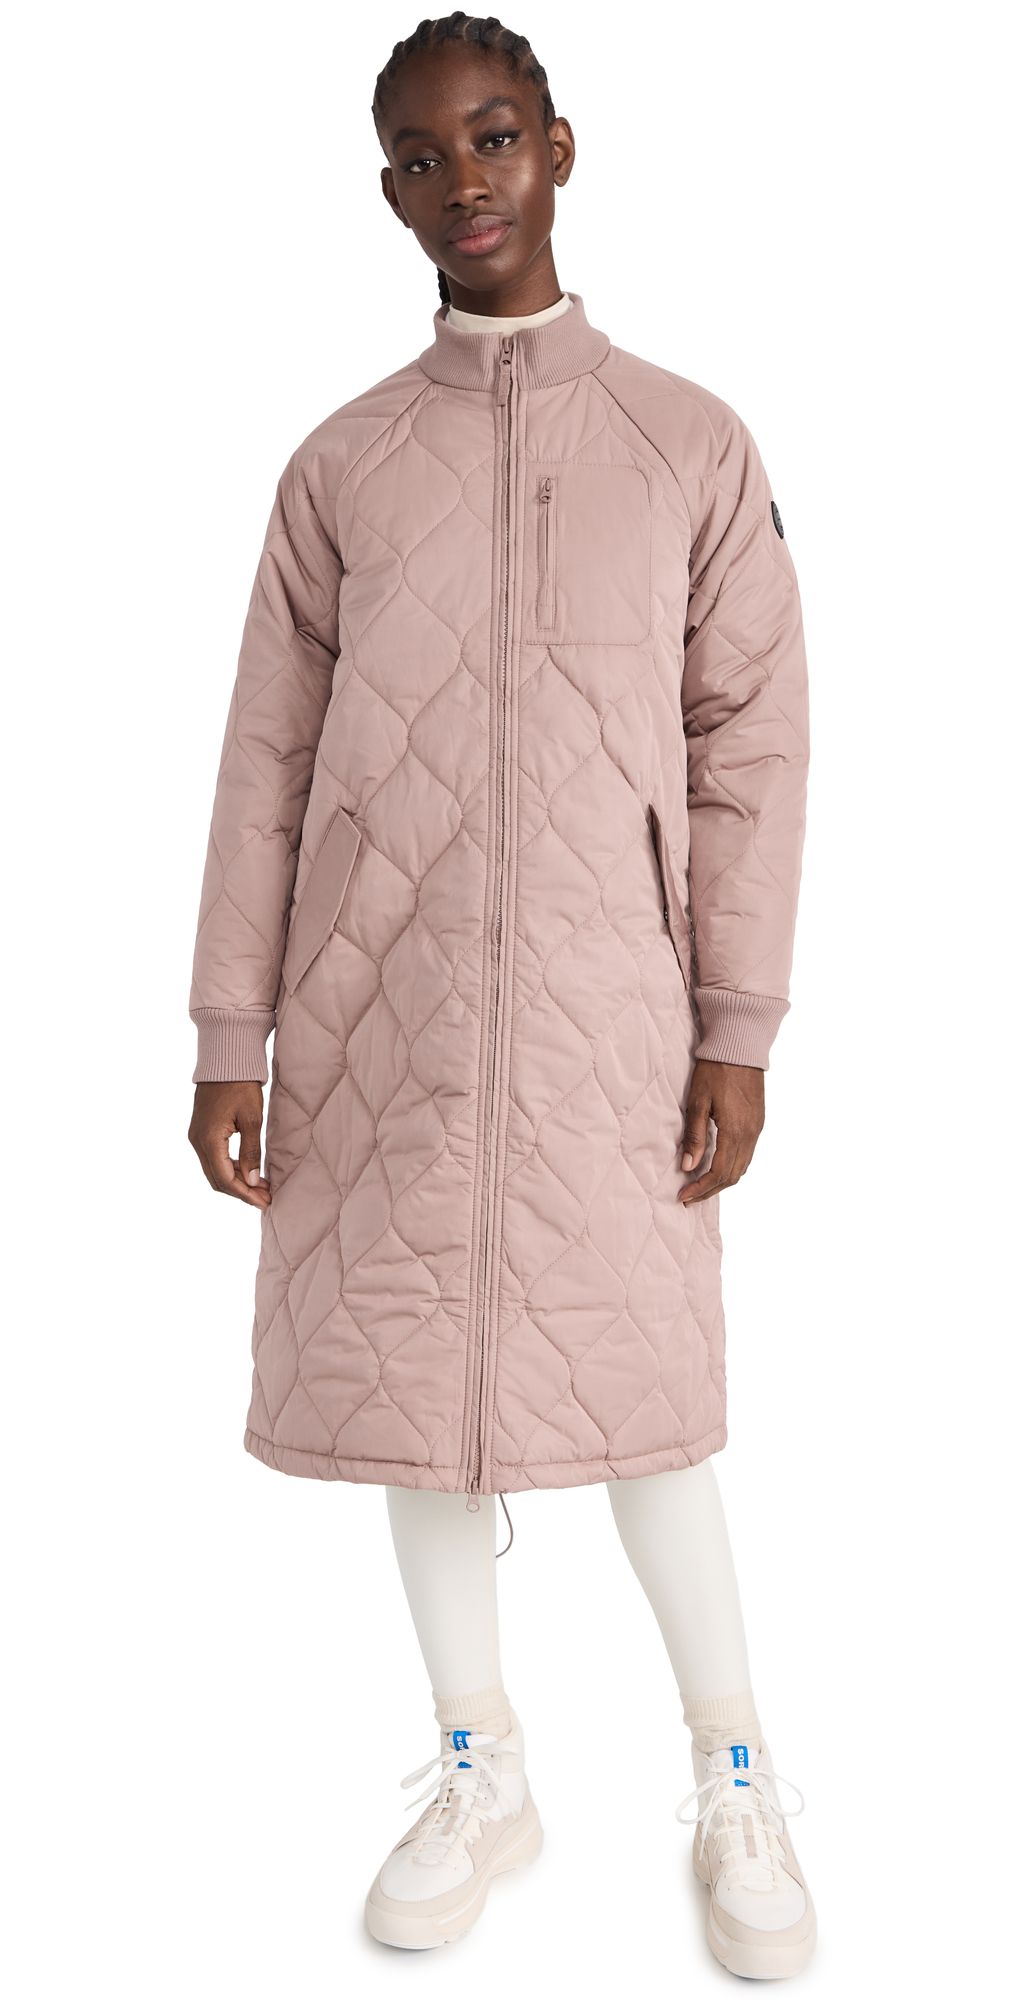 Best Quilted Jackets - Cute Quilted Jackets for Spring